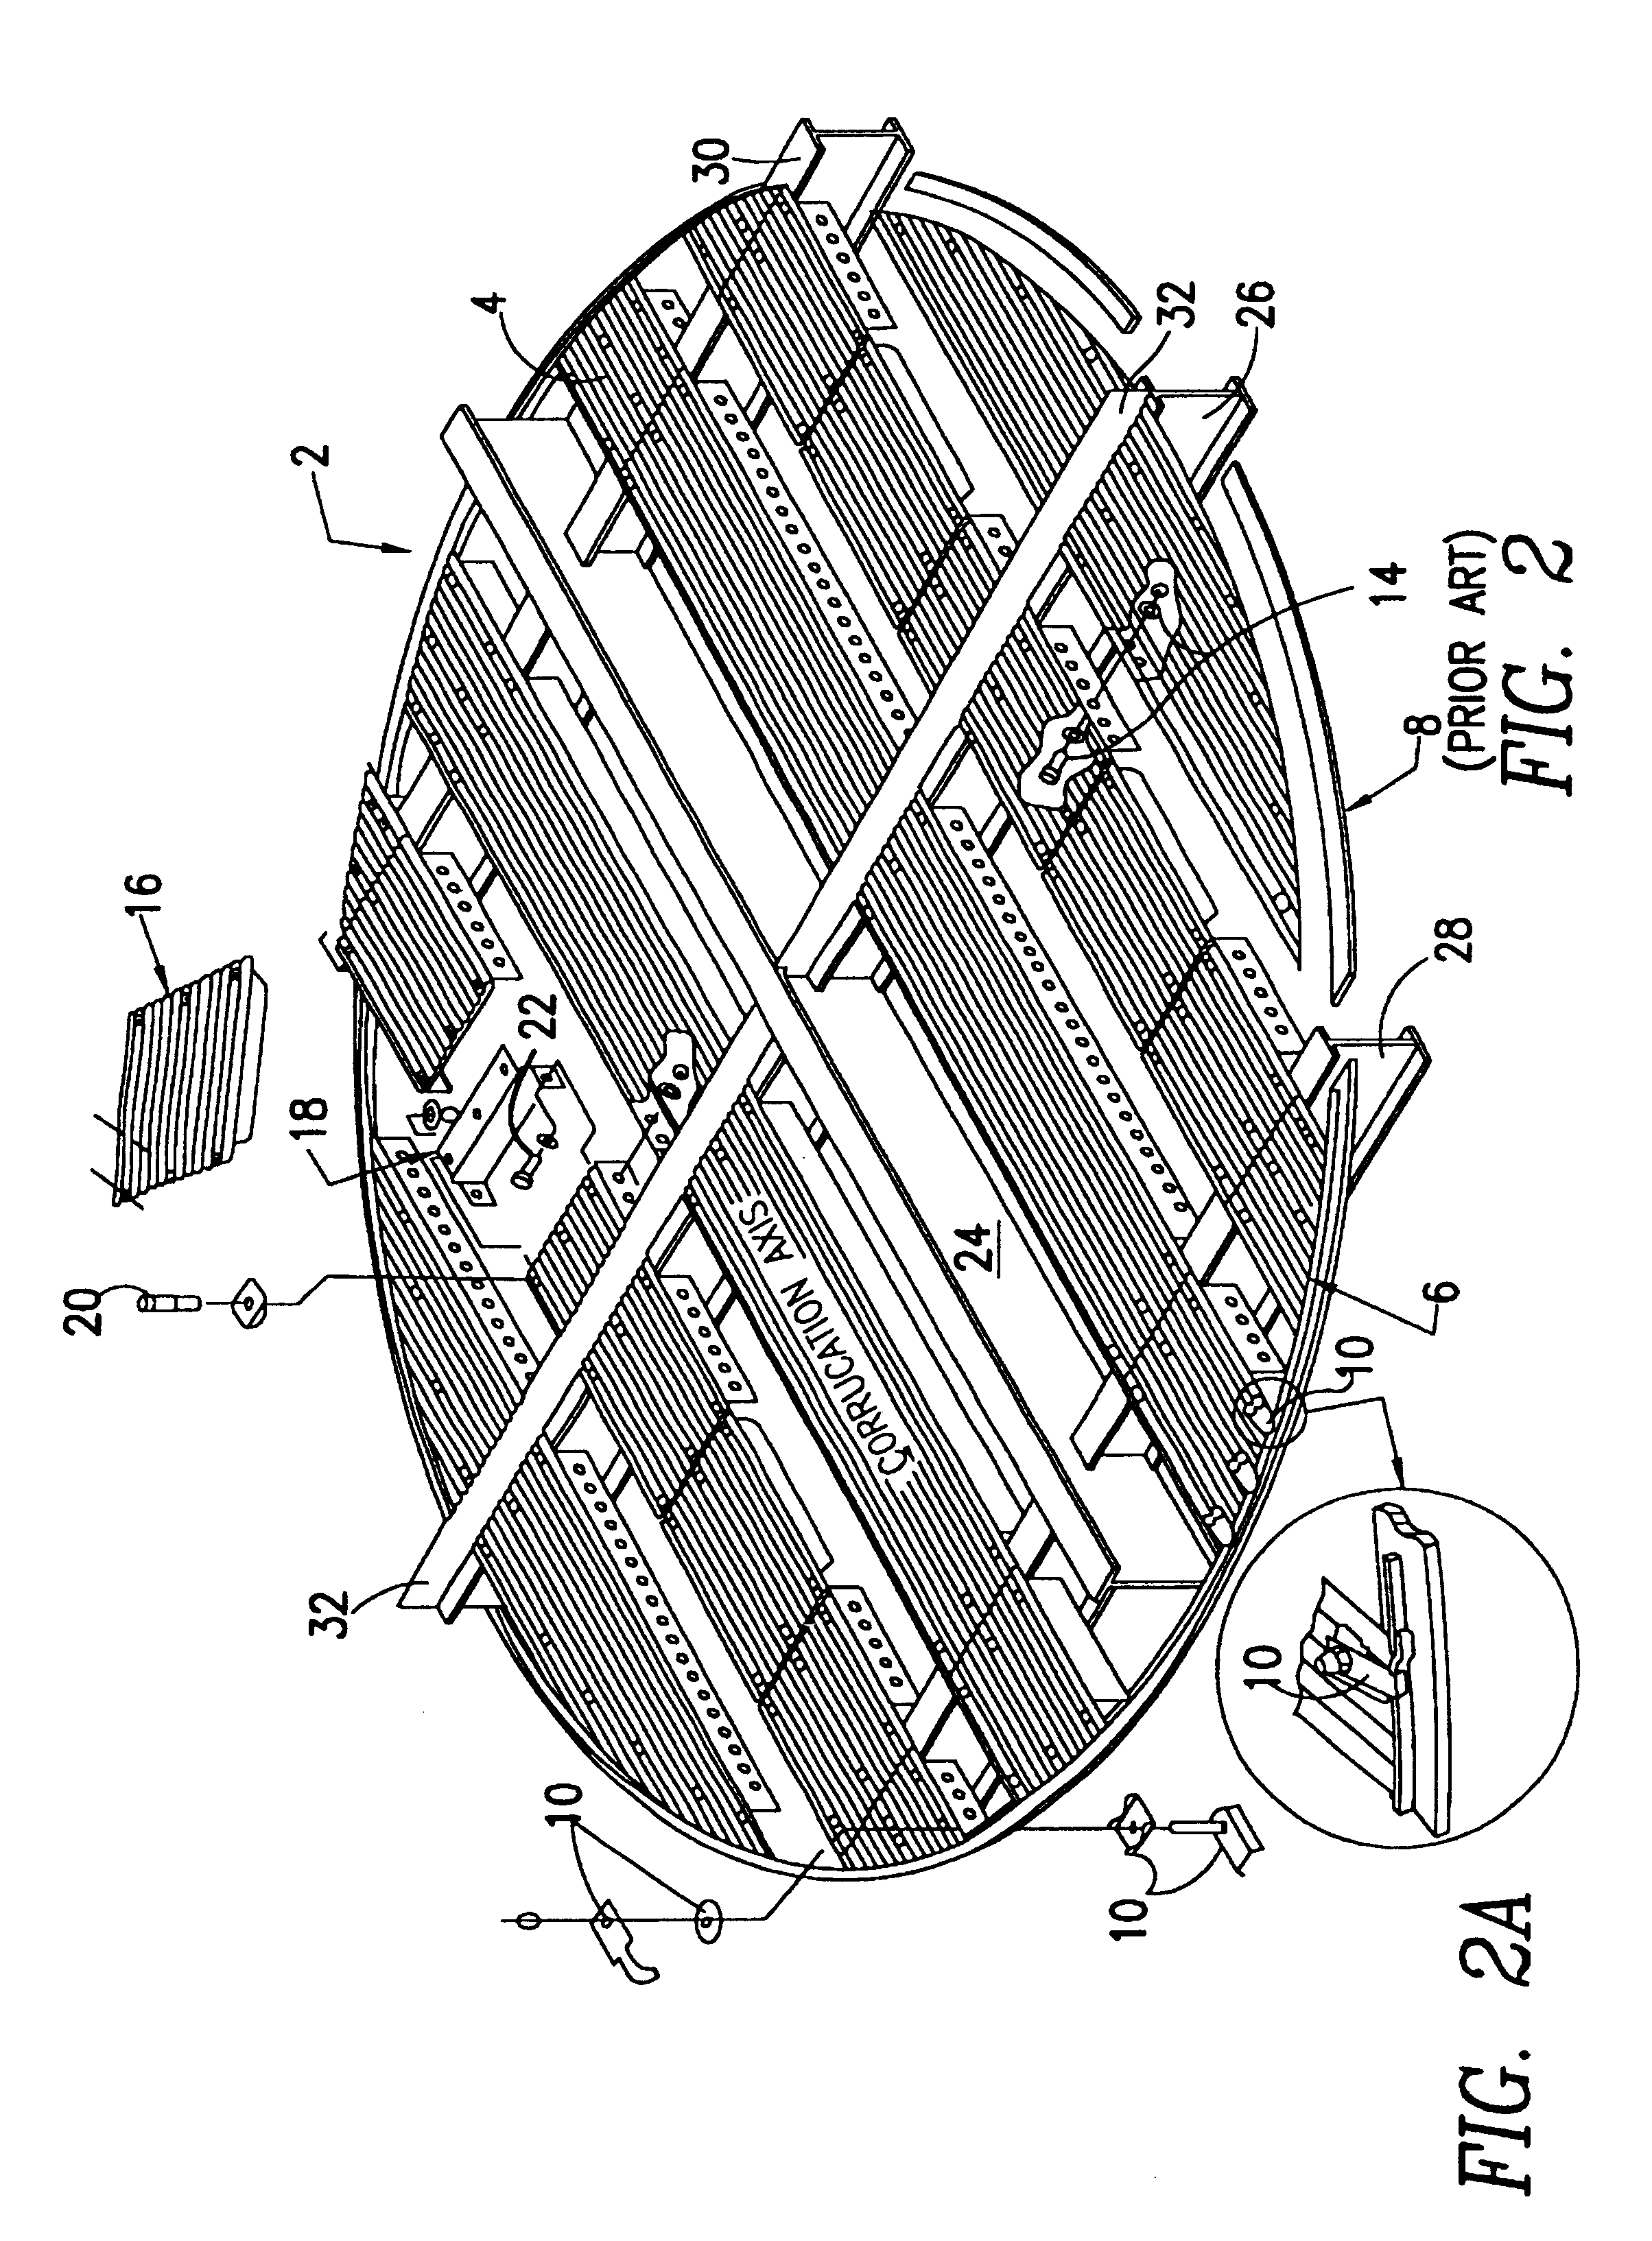 Advanced tray support system using orthogonal grillage